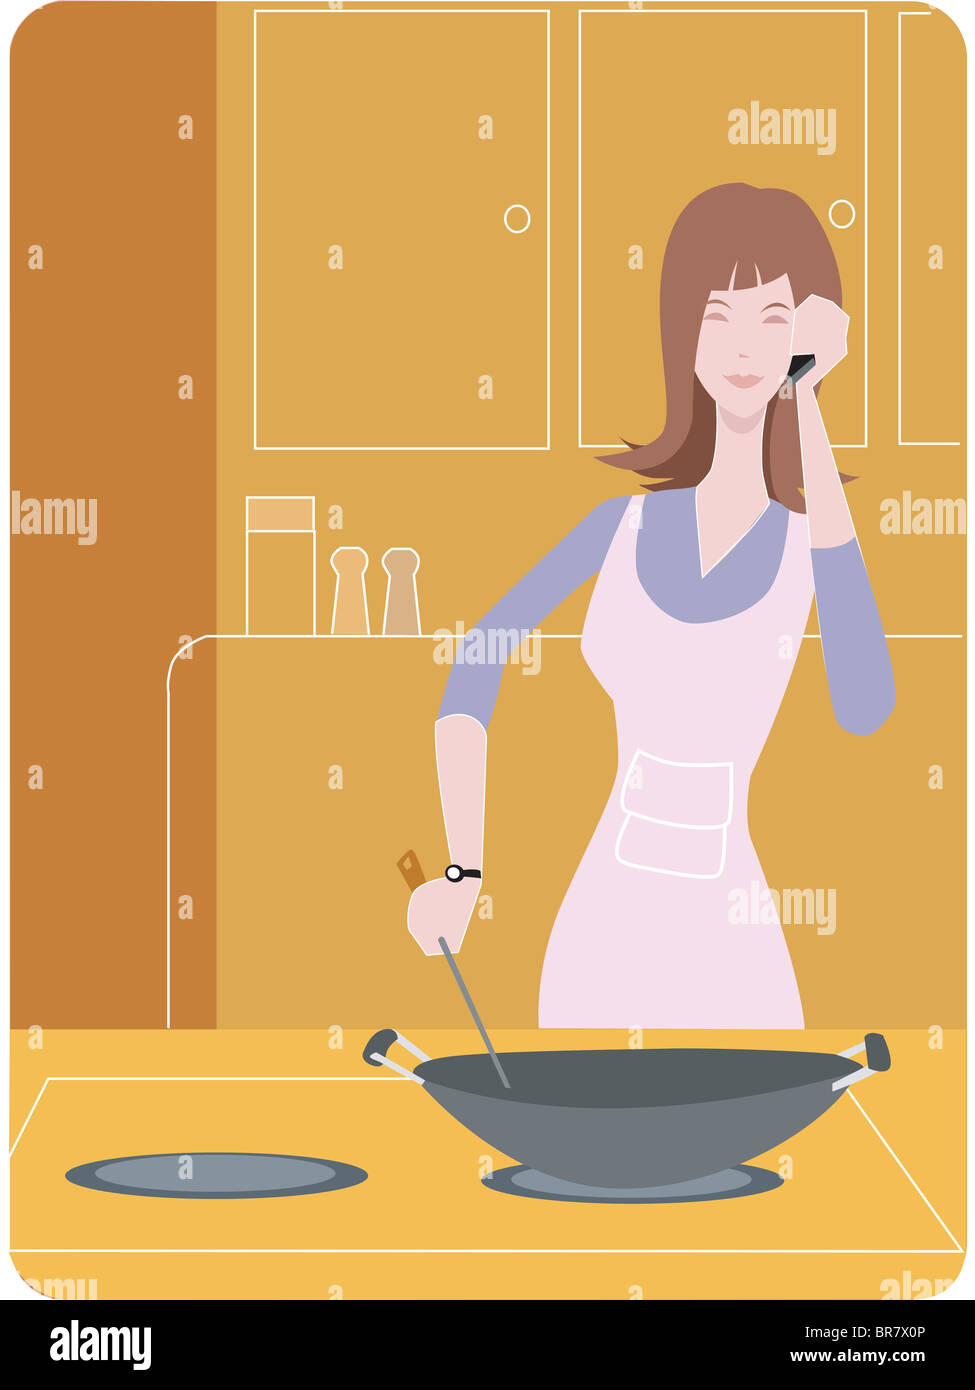 Woman cooking with a wok and talking on the phone Stock Photo